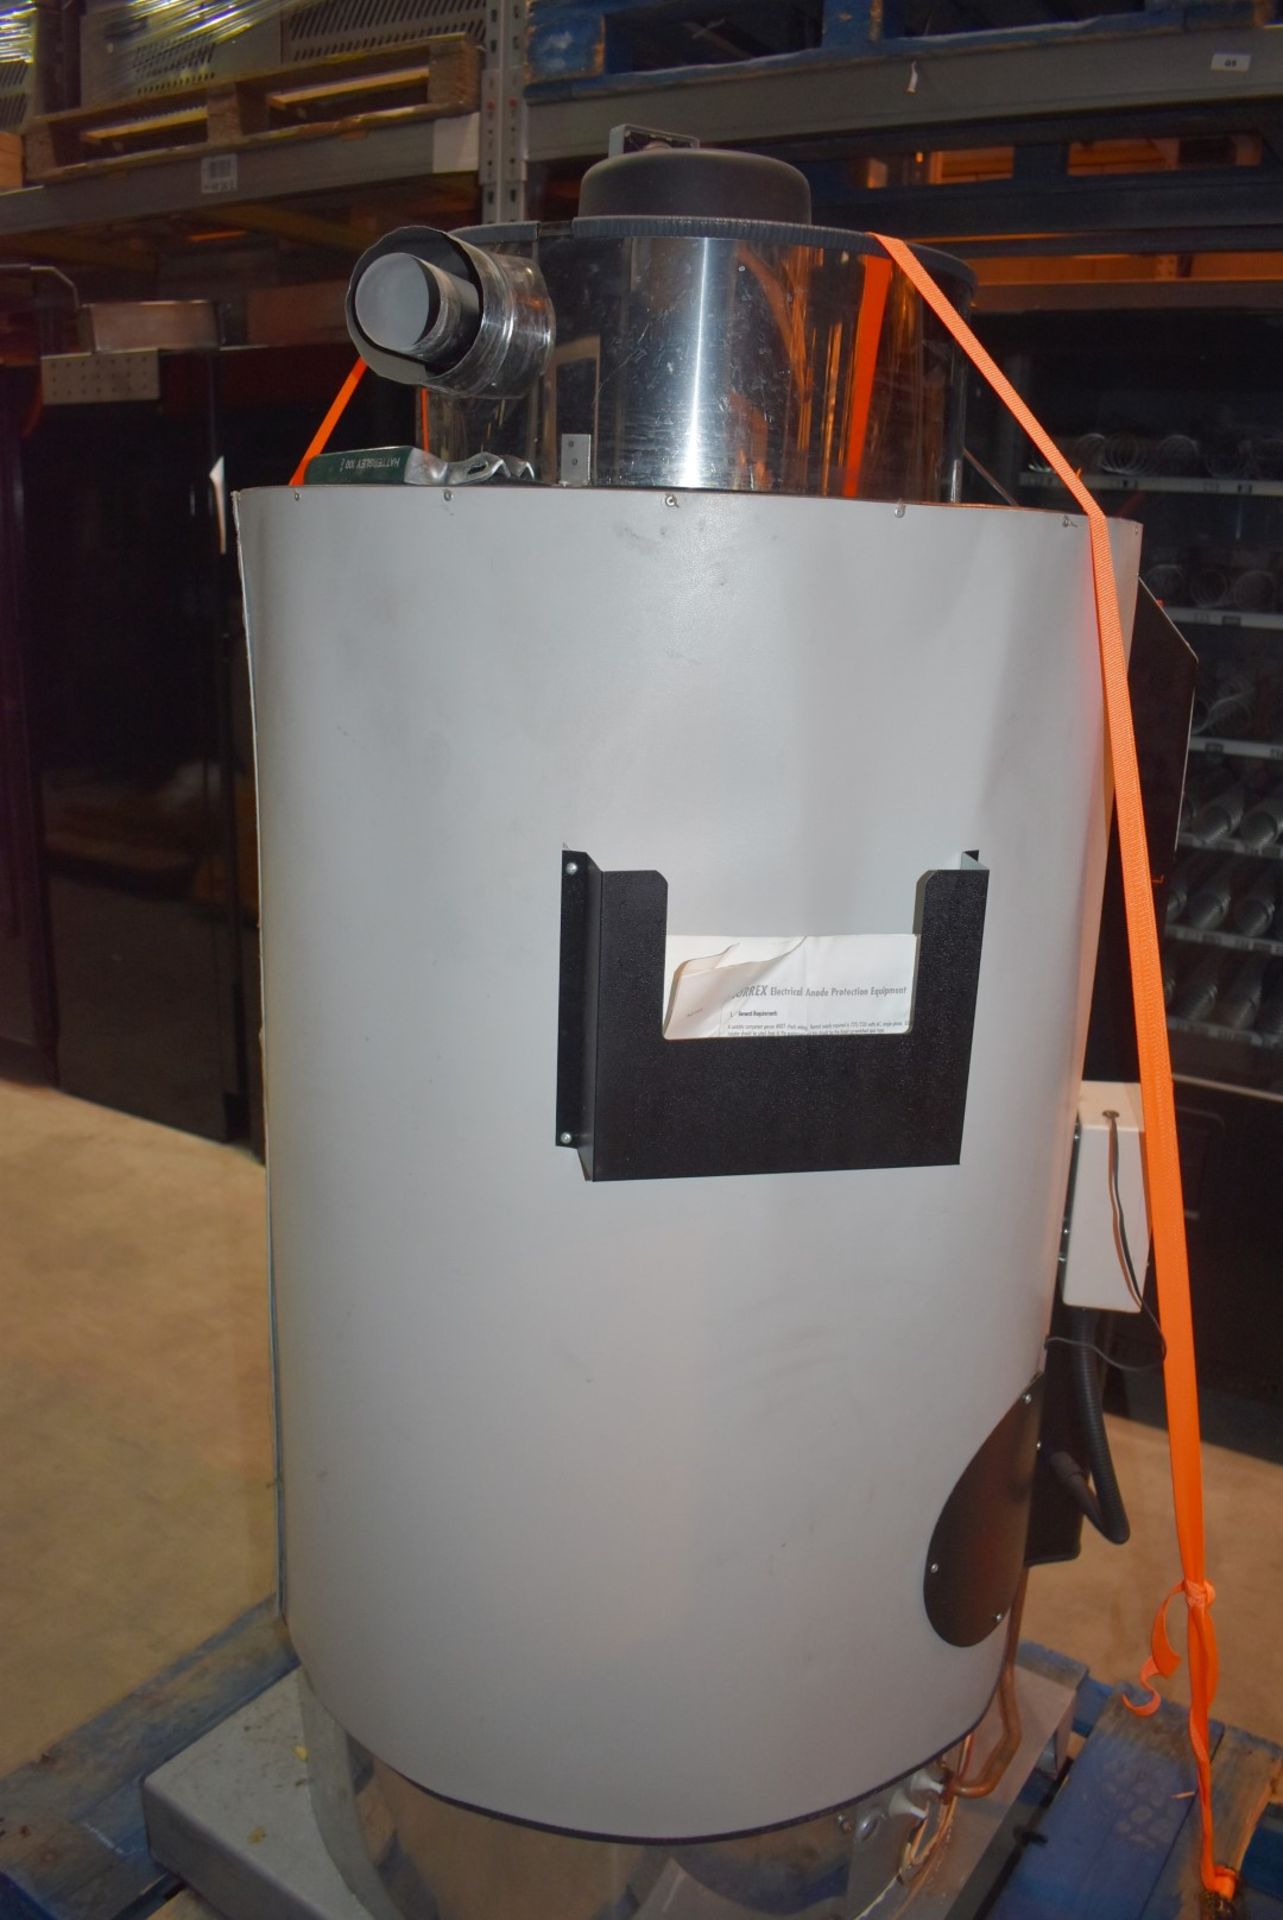 1 x Lochinvar High Efficiency Gas Fired 220L Storage Water Heater - Model LBF-220 - Ref: WH2-144 H5D - Image 14 of 19